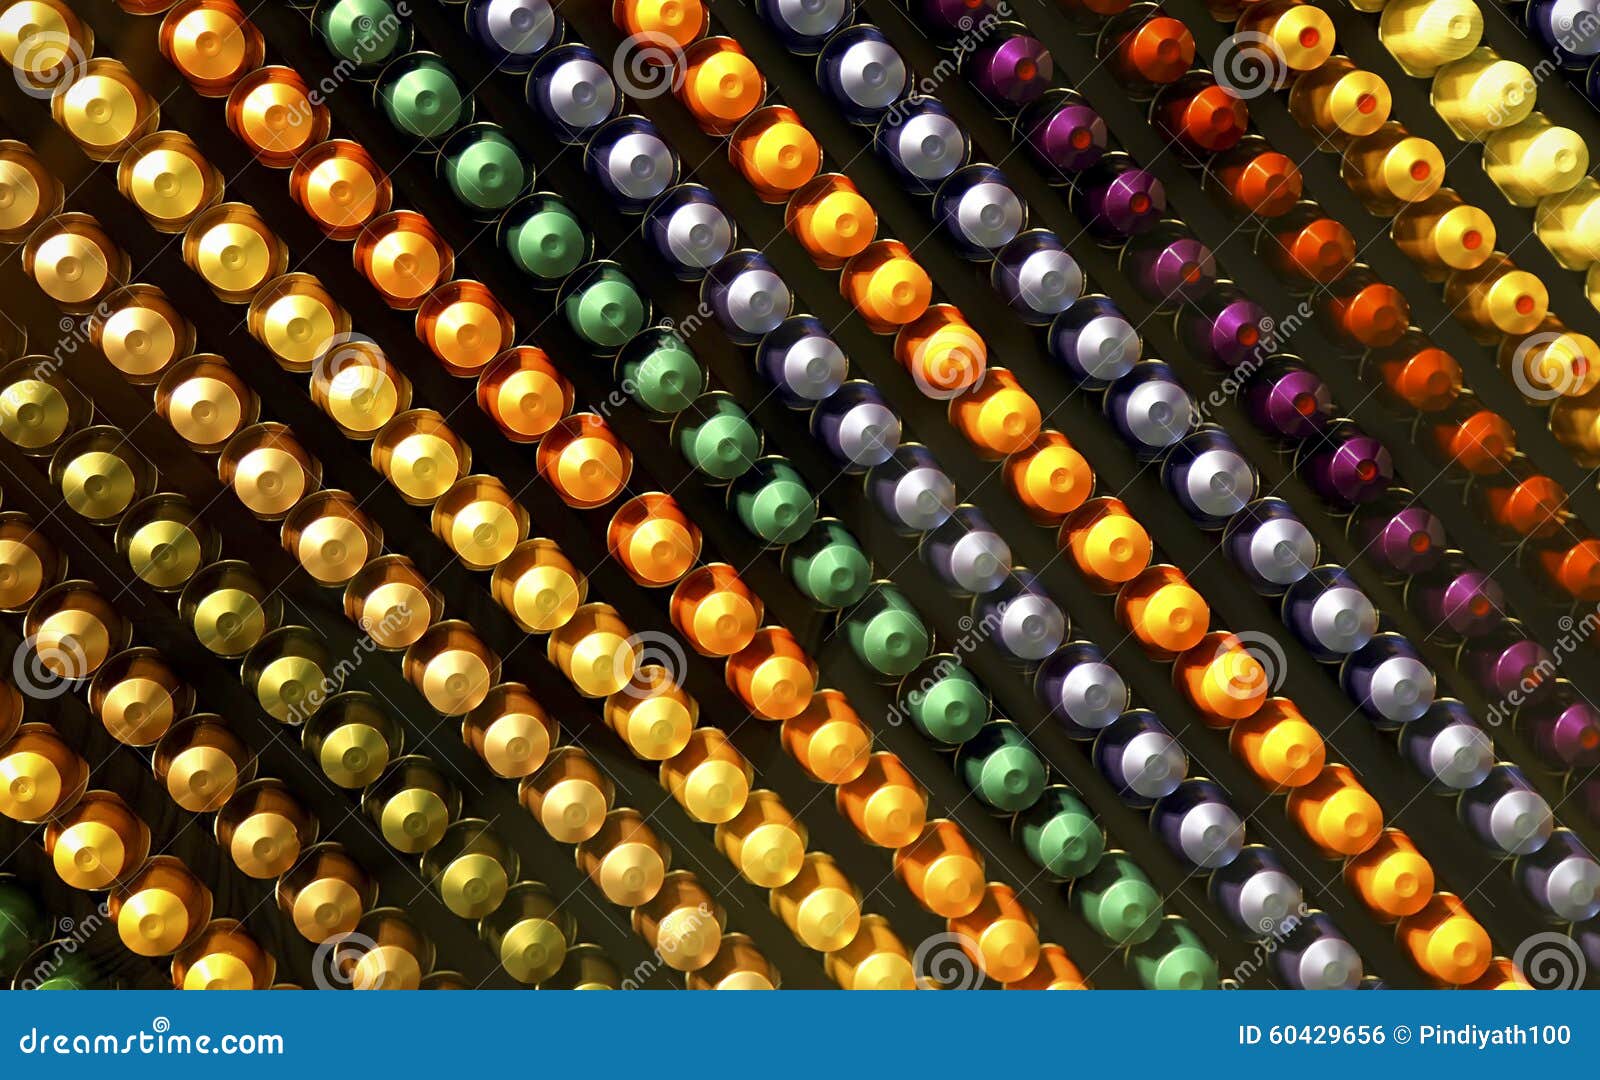 colorful abstract pattern of knobs